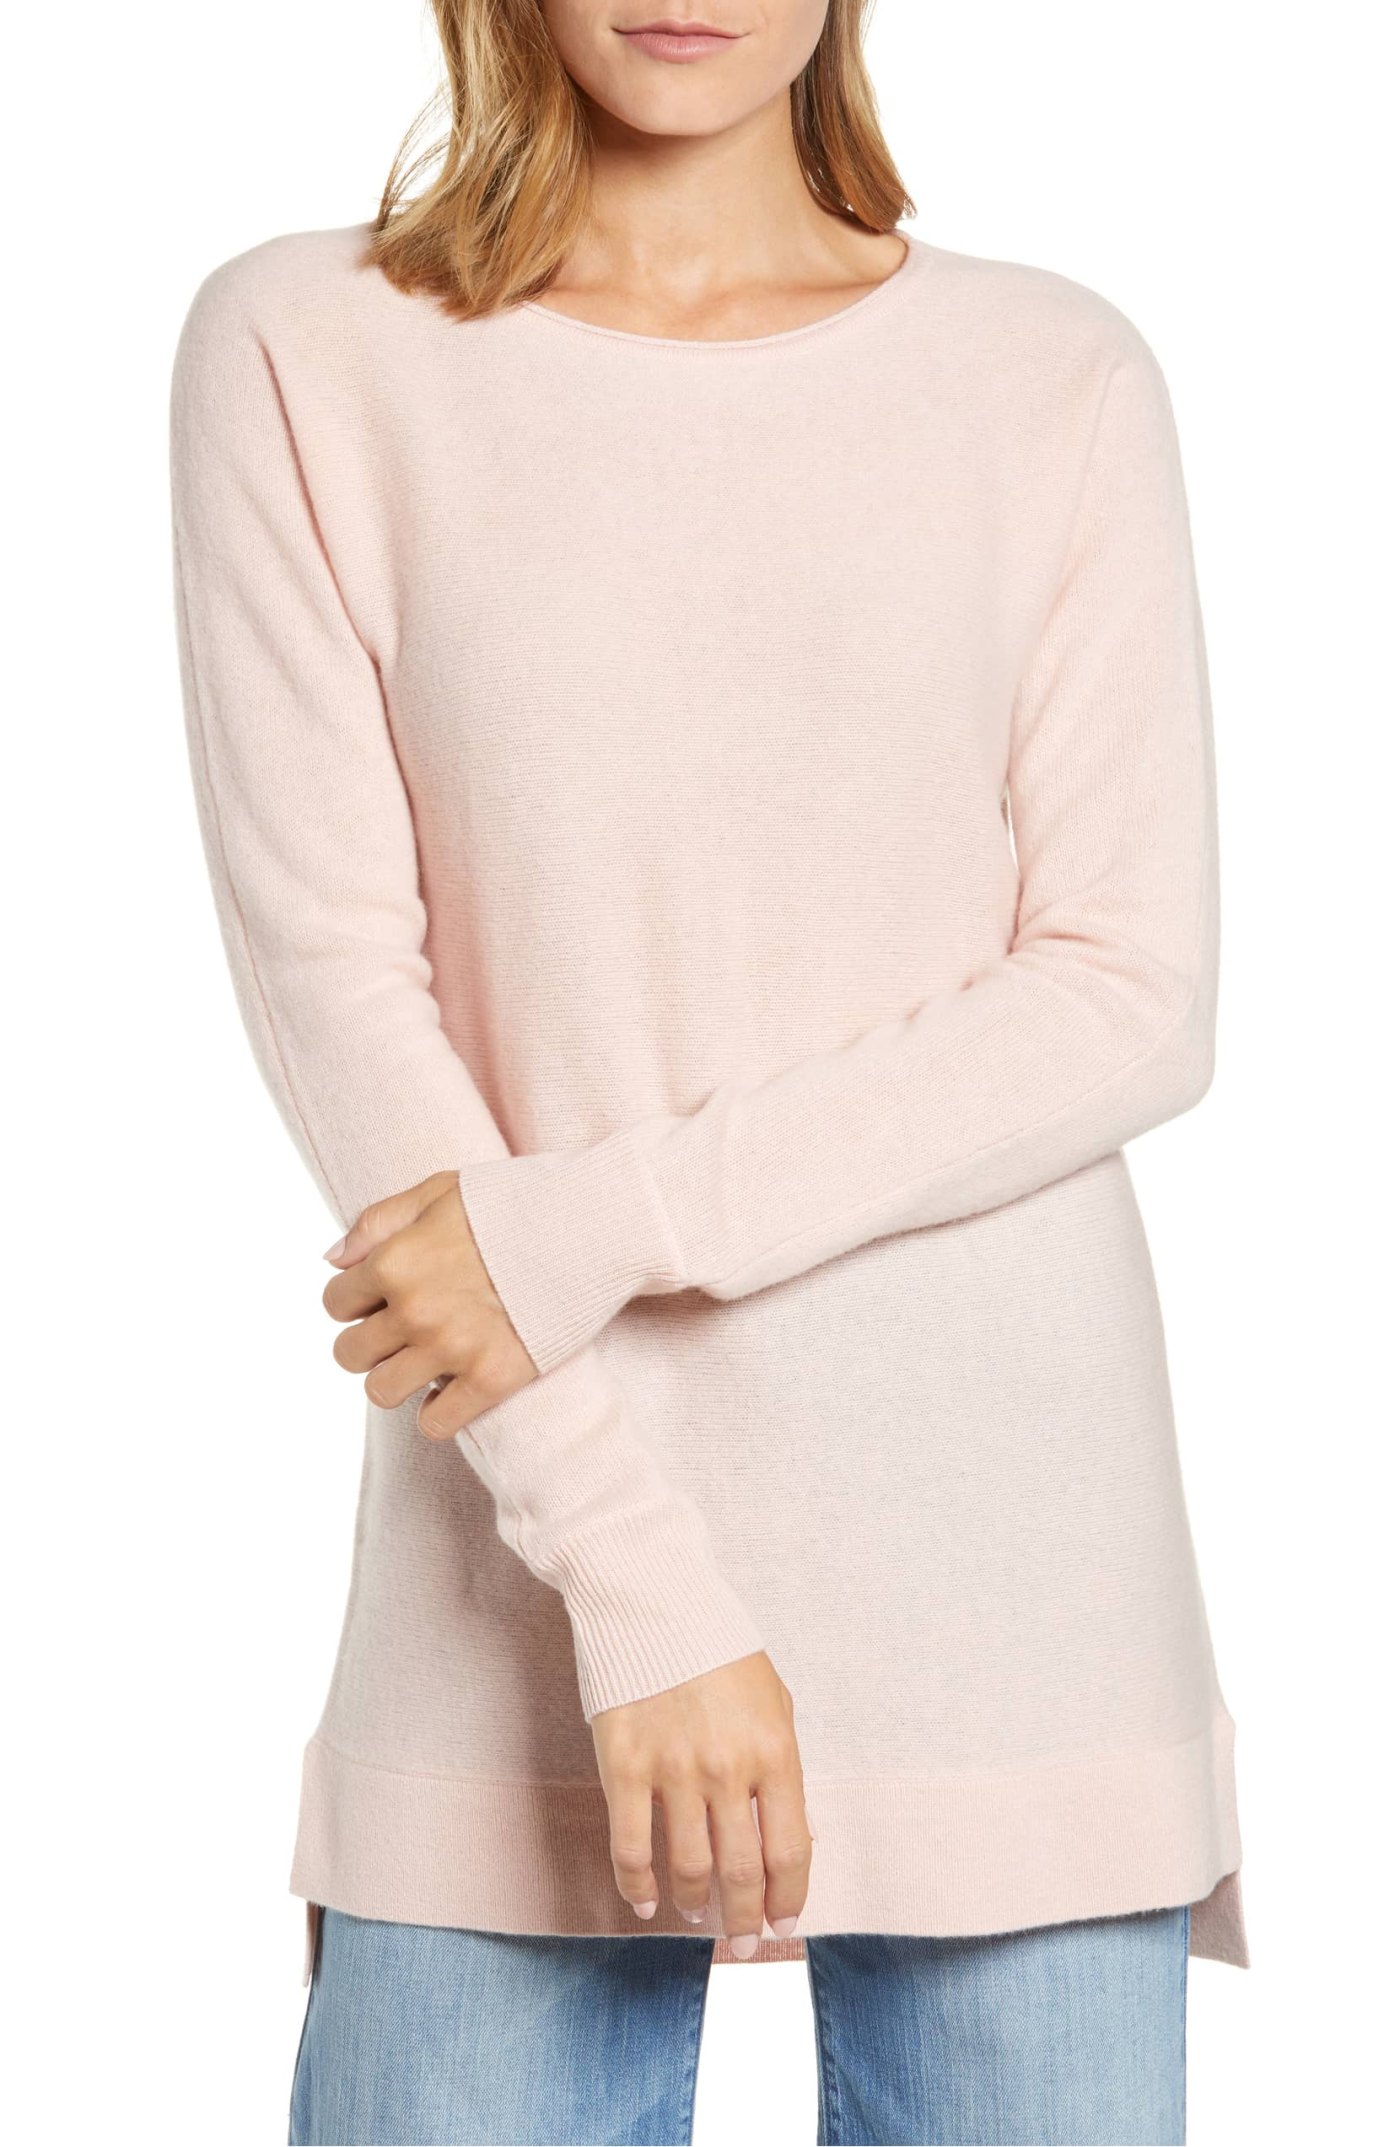 Layer Stylishly With This Wool and Cashmere Sweater